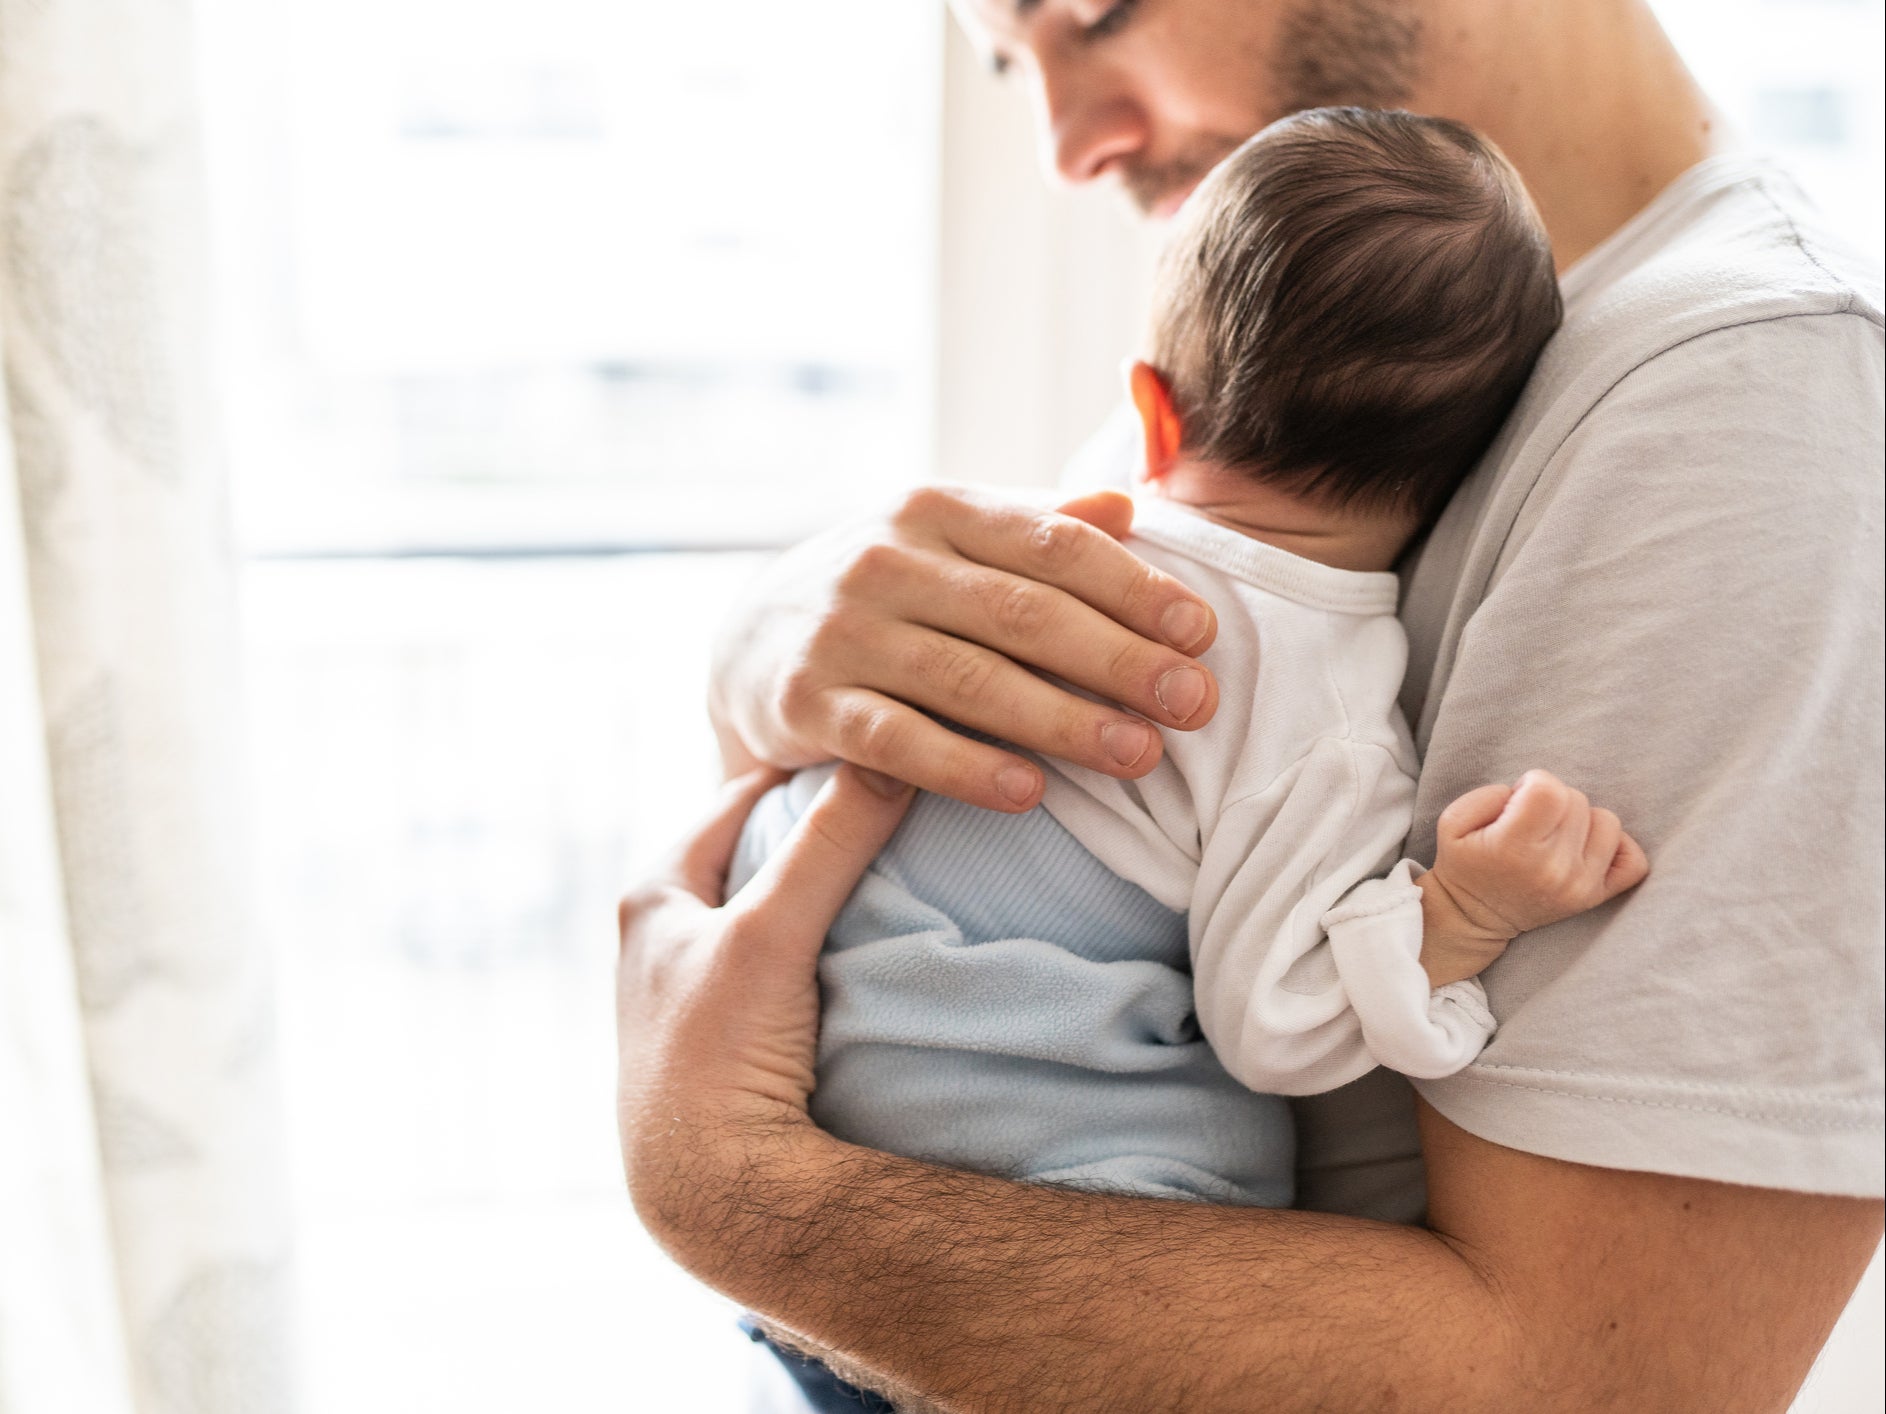 One in 10 fathers surveyed said they had not taken any paternity leave at all